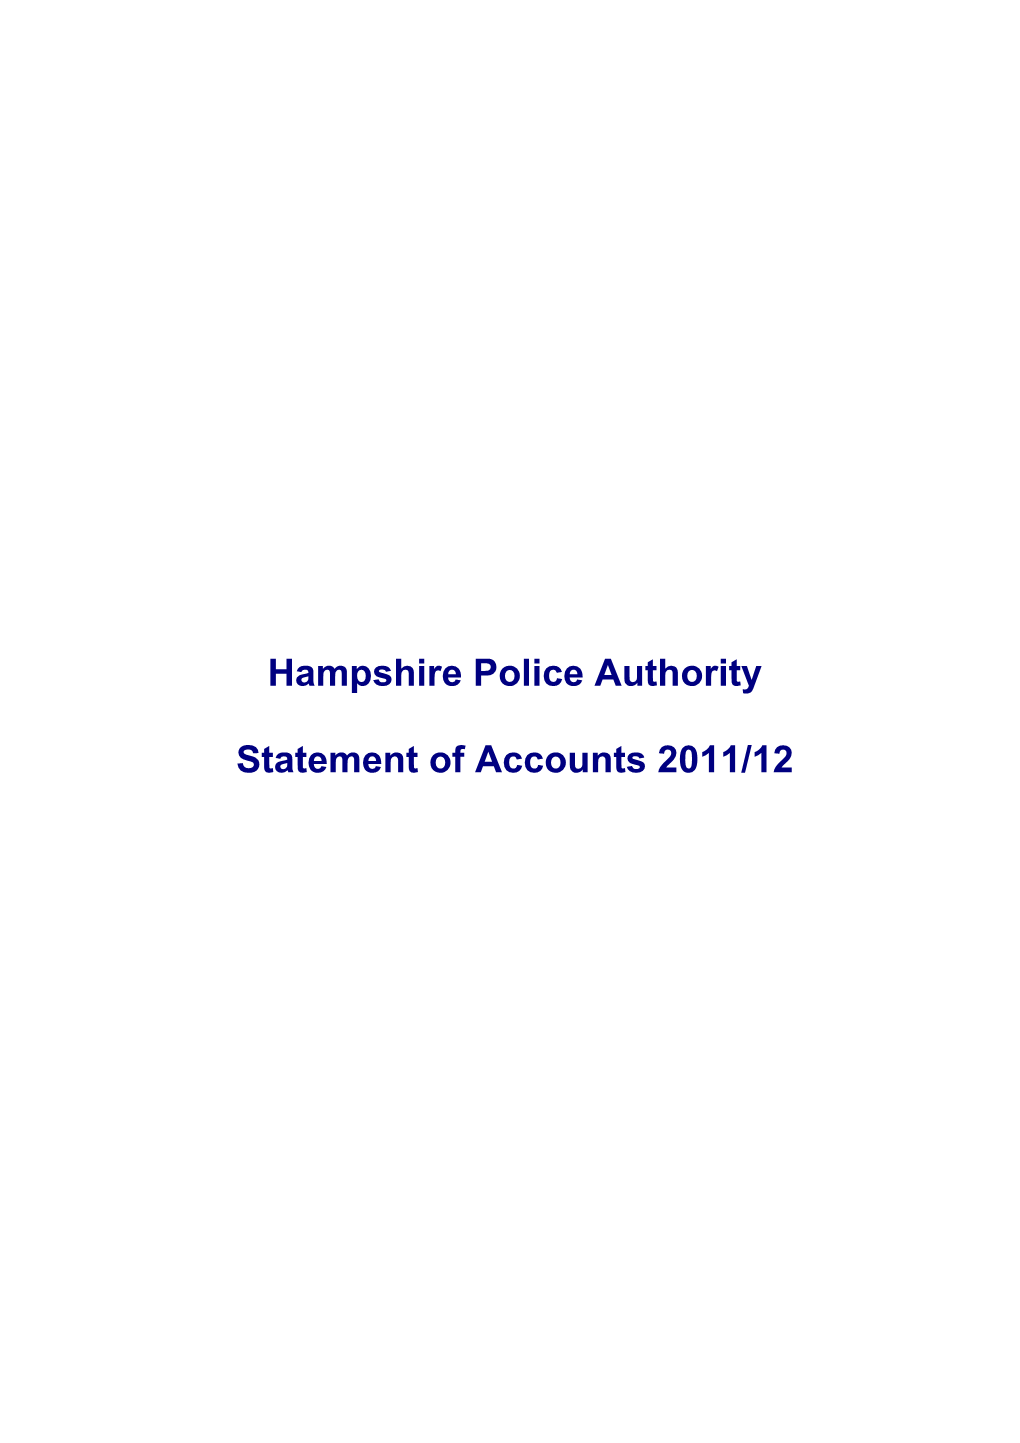 Hampshire Police Authority Statement of Accounts 2011/12